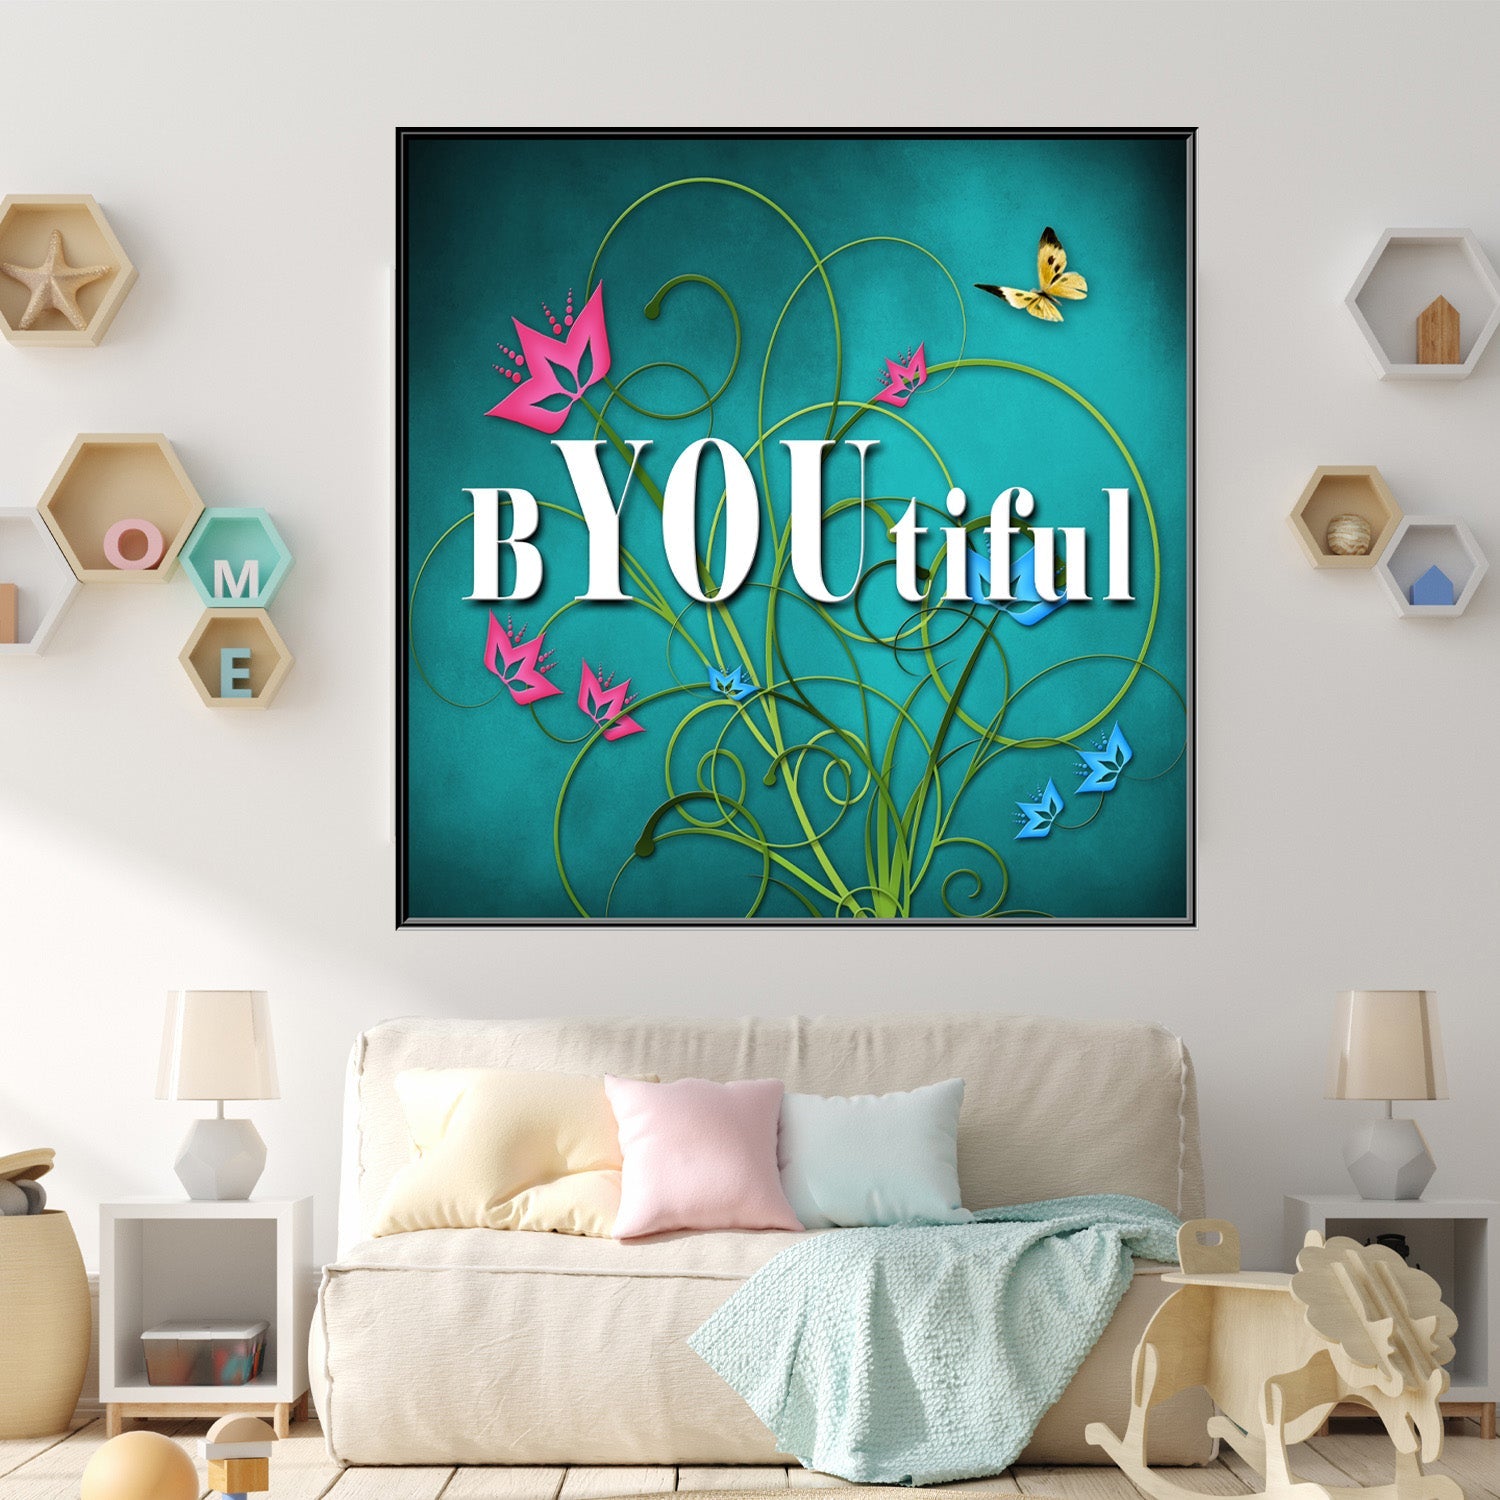 https://cdn.shopify.com/s/files/1/0387/9986/8044/products/BYOUtifulCanvasArtprintStretched-3.jpg